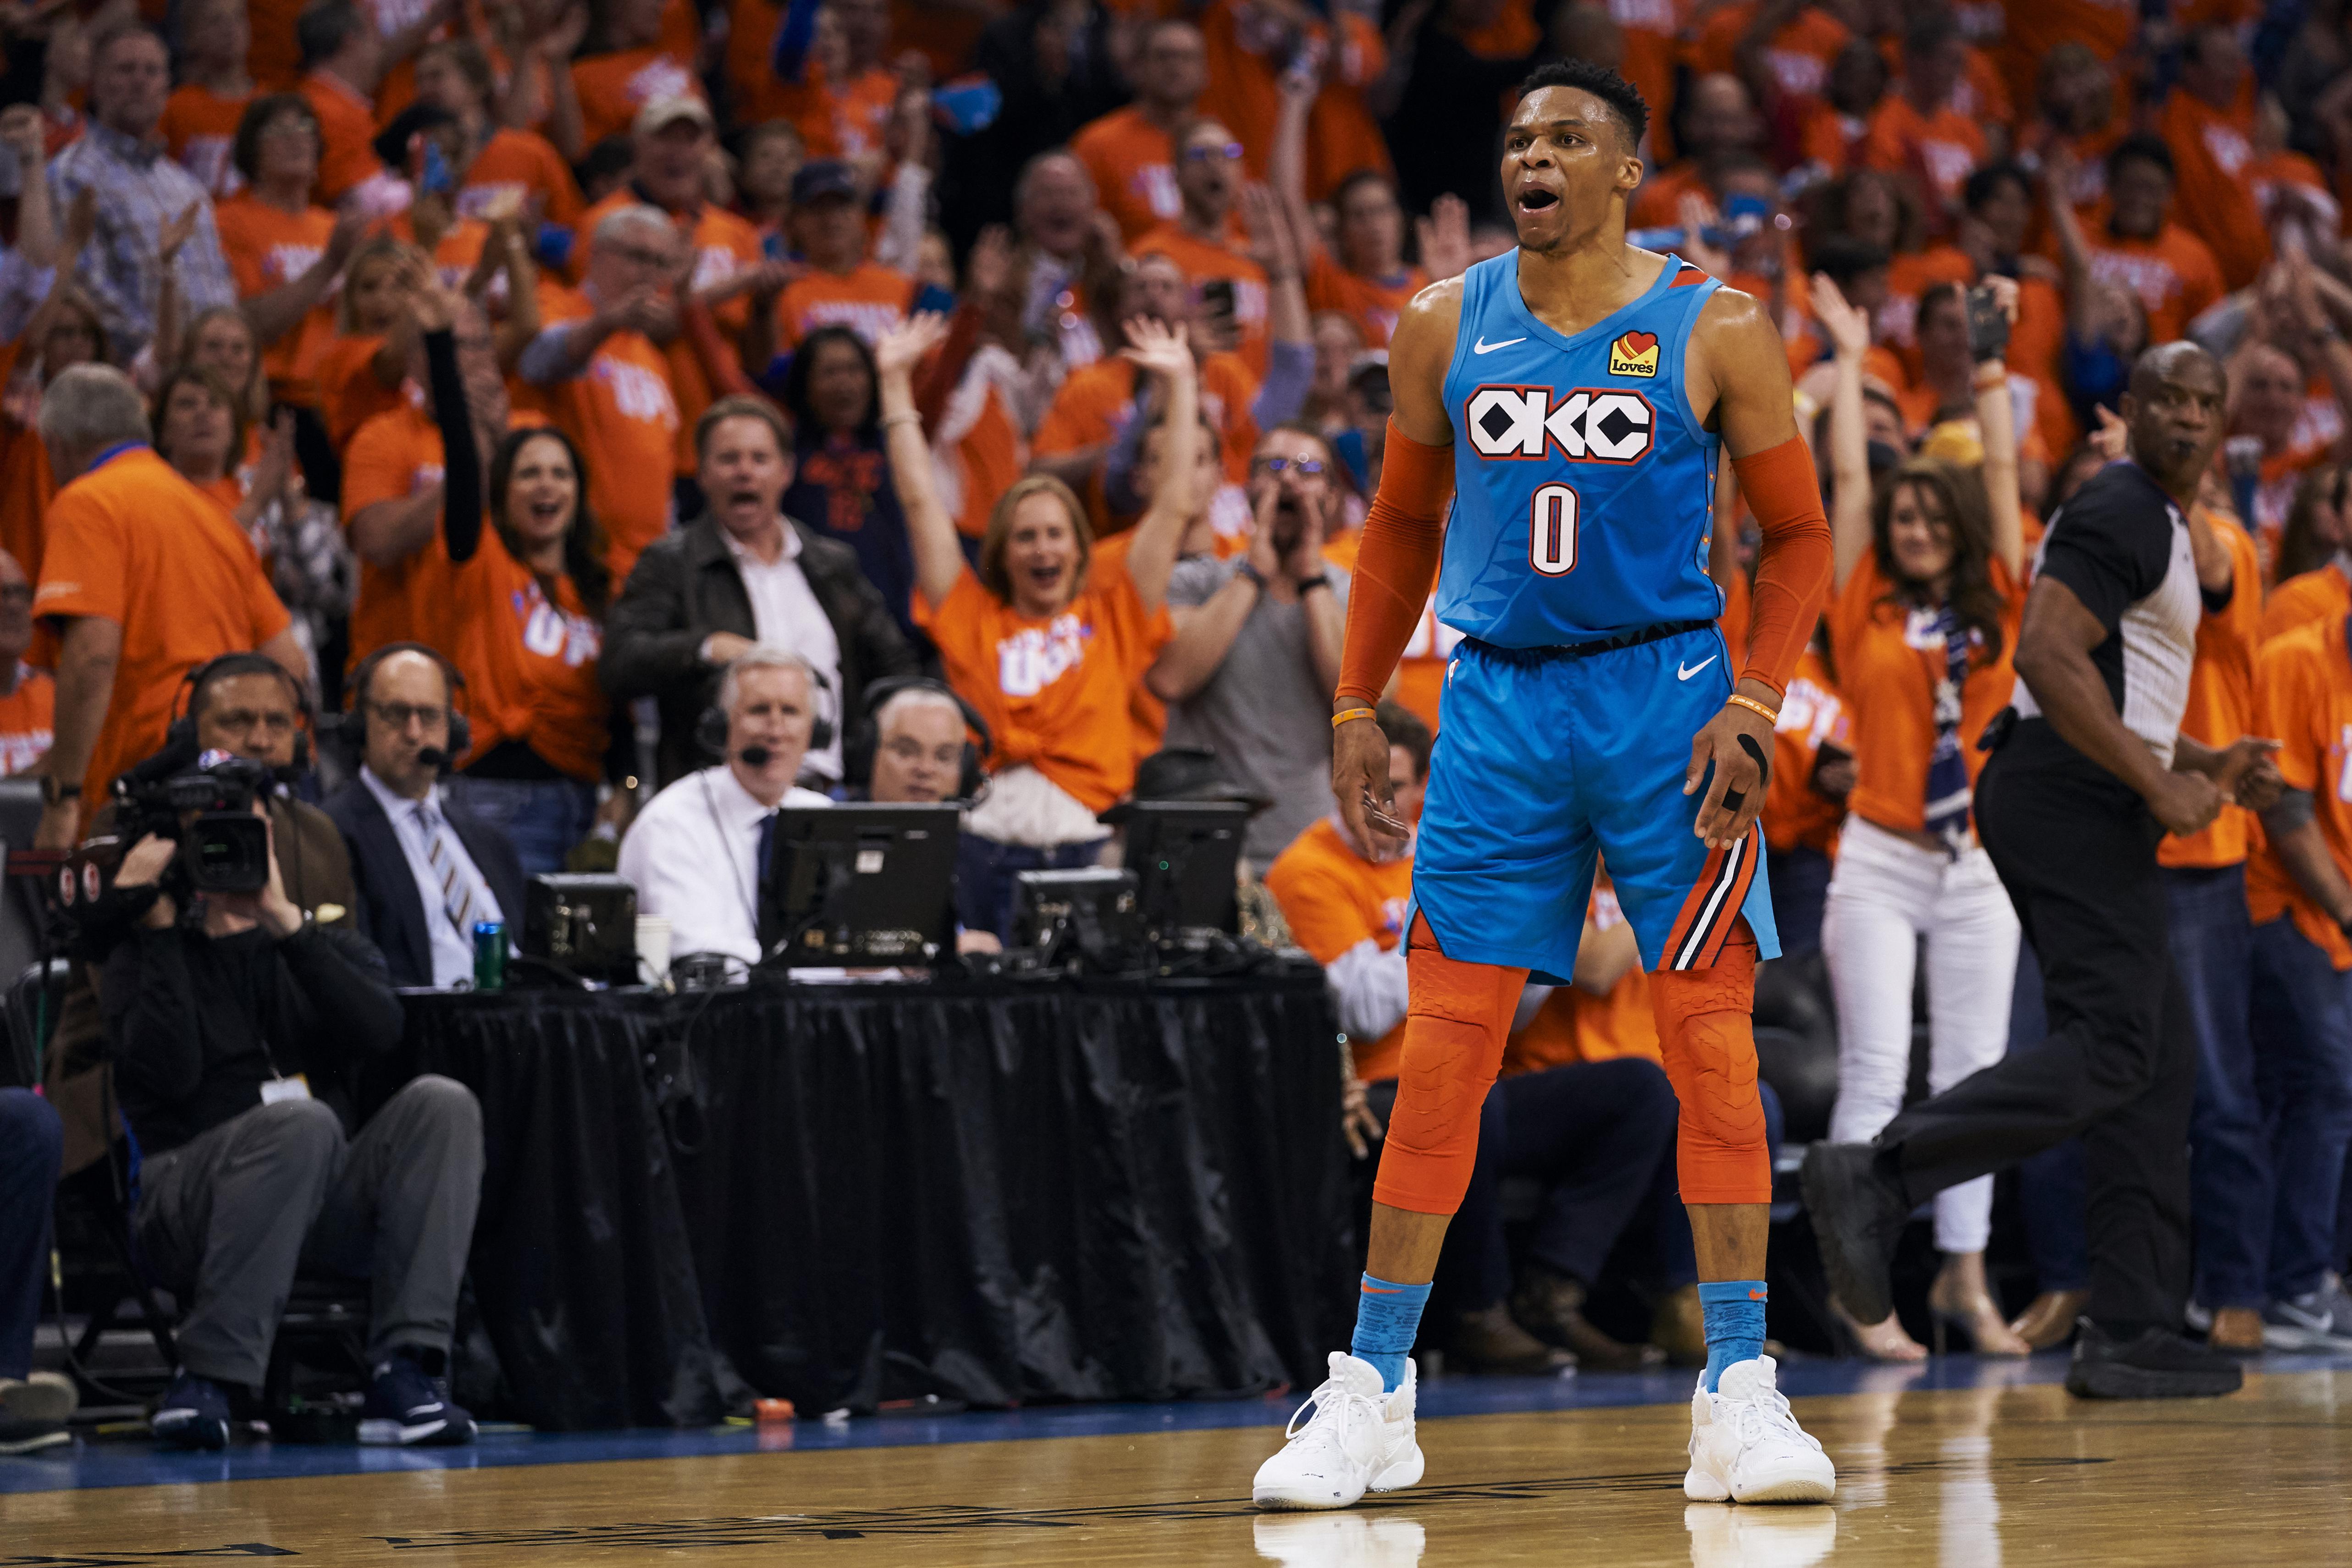 OKLAHOMA CITY, OKLAHOMA - APRIL 19: Russell Westbrook #0 of the Oklahoma City Thunder reacts after a made basket against the Portland Trail Blazers during the second half of game three of the Western Conference quarterfinals at Chesapeake Energy Arena on April 19, 2019 in Oklahoma City, Oklahoma. NOTE TO USER: User expressly acknowledges and agrees that, by downloading and or using this photograph, User is consenting to the terms and conditions of the Getty Images License Agreement.  (Photo by Cooper Neill/Getty Images)